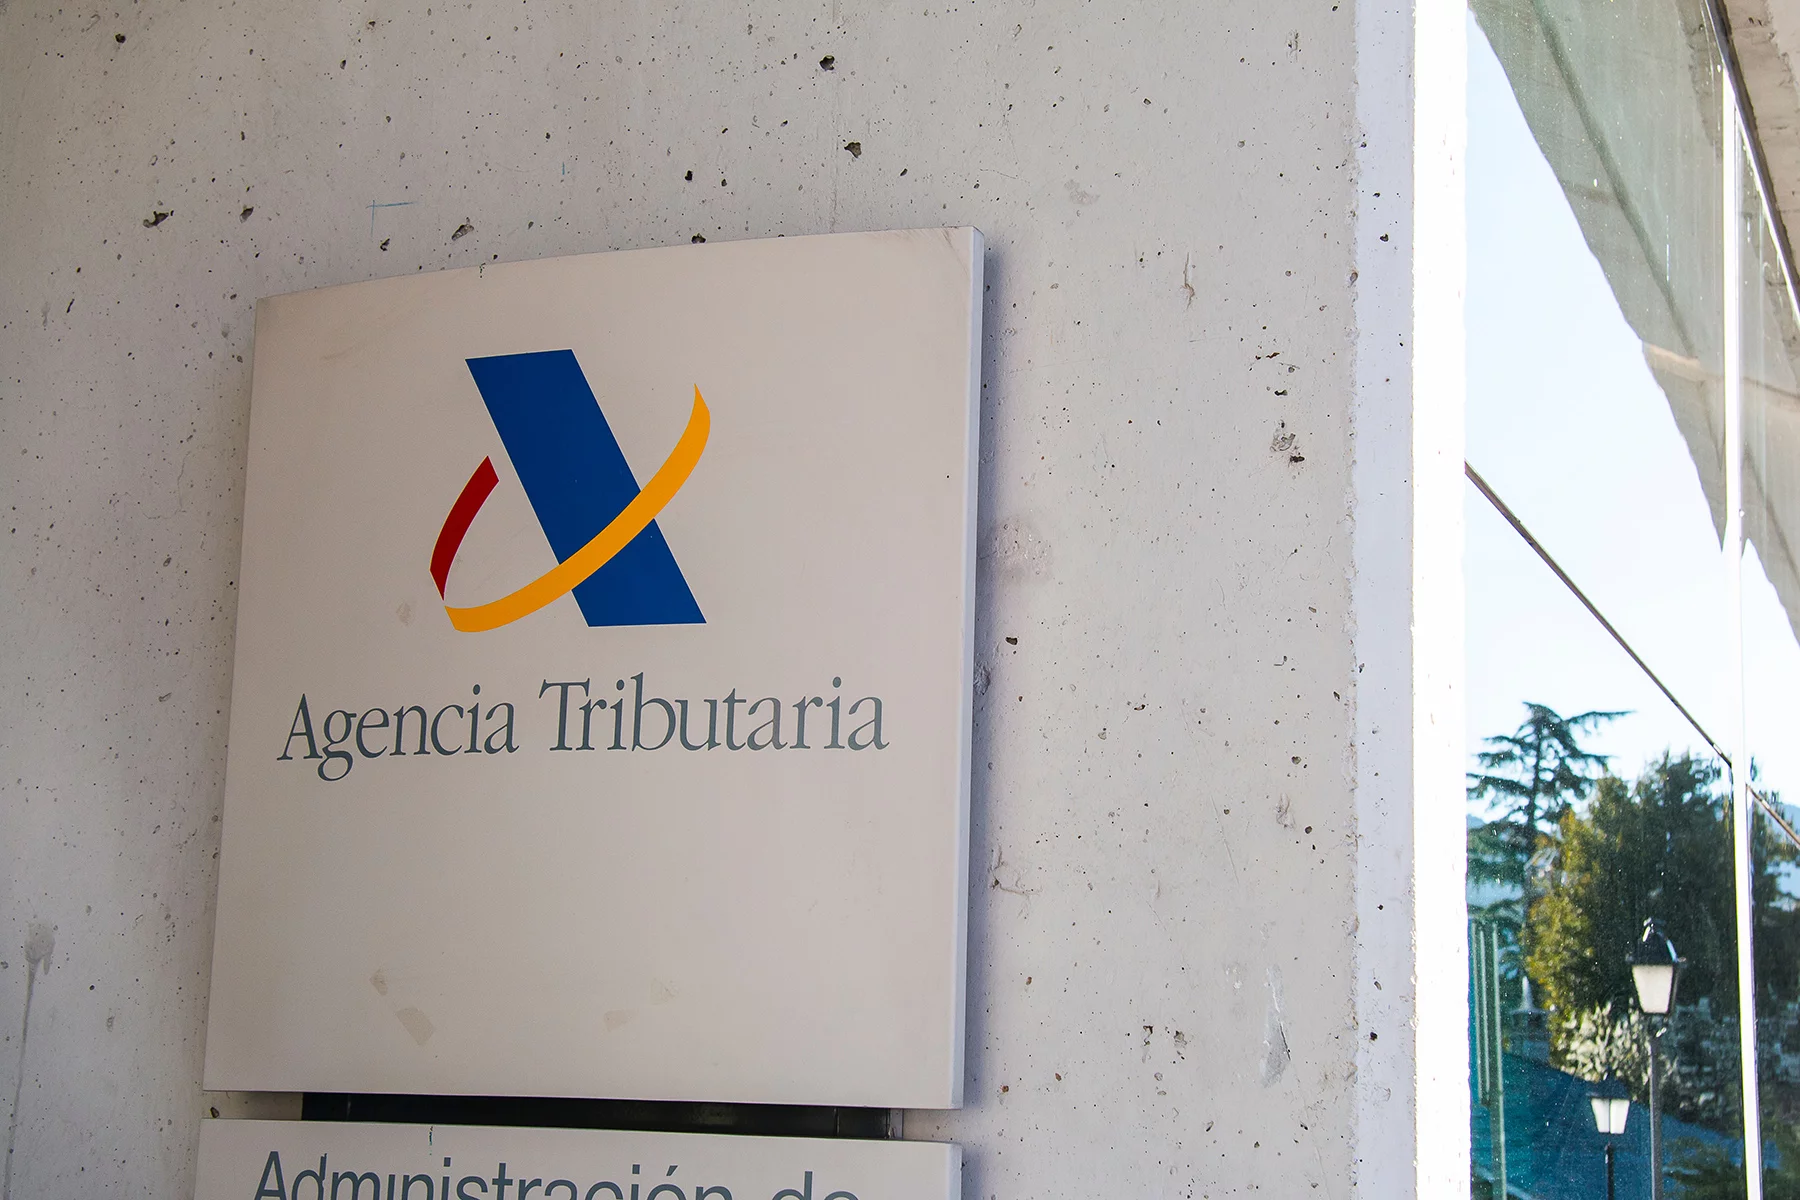 An Agencia Tributaria office in Madrid, Spain